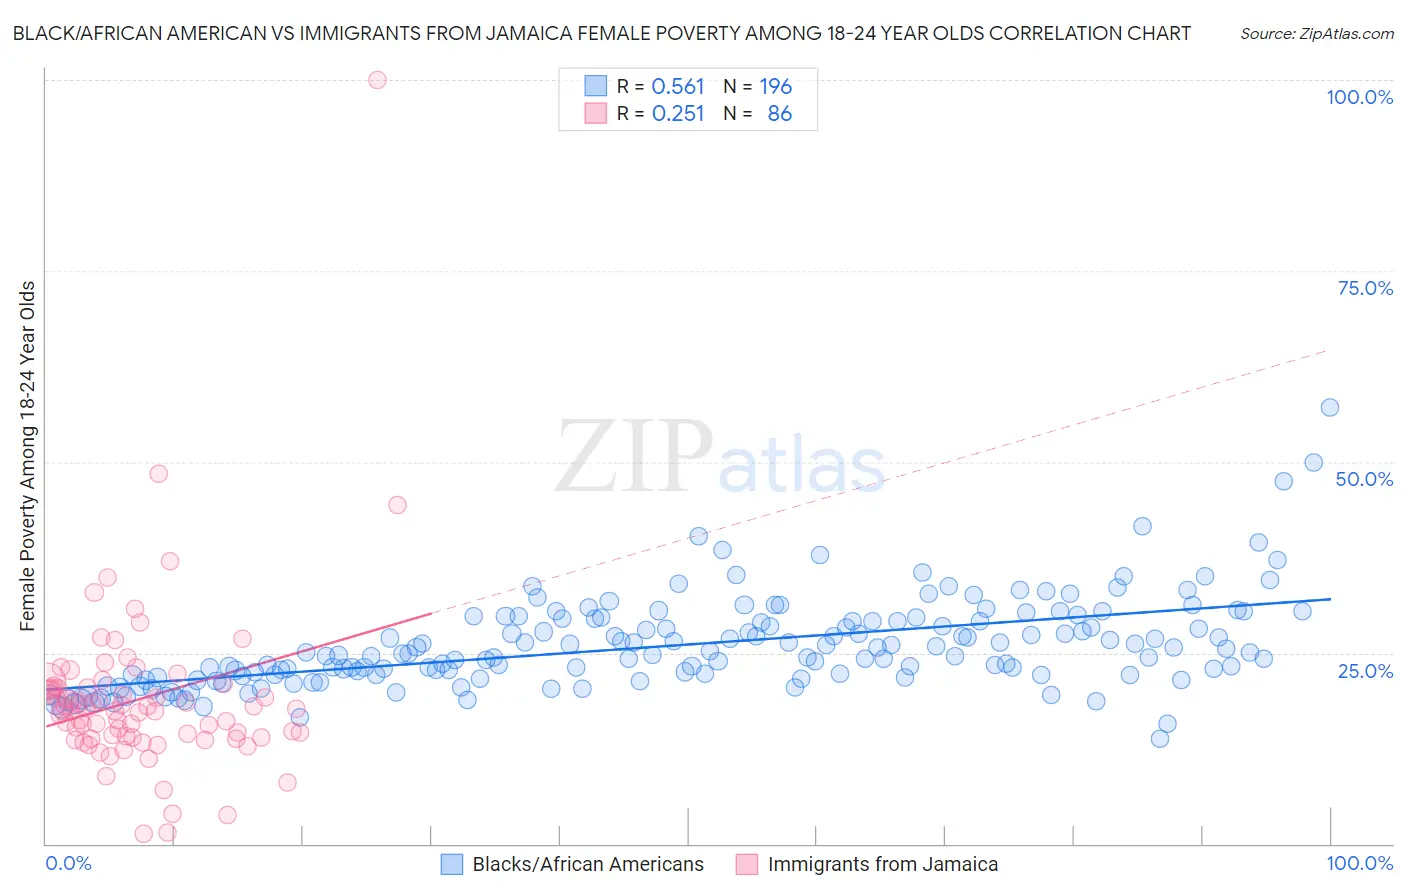 Black/African American vs Immigrants from Jamaica Female Poverty Among 18-24 Year Olds